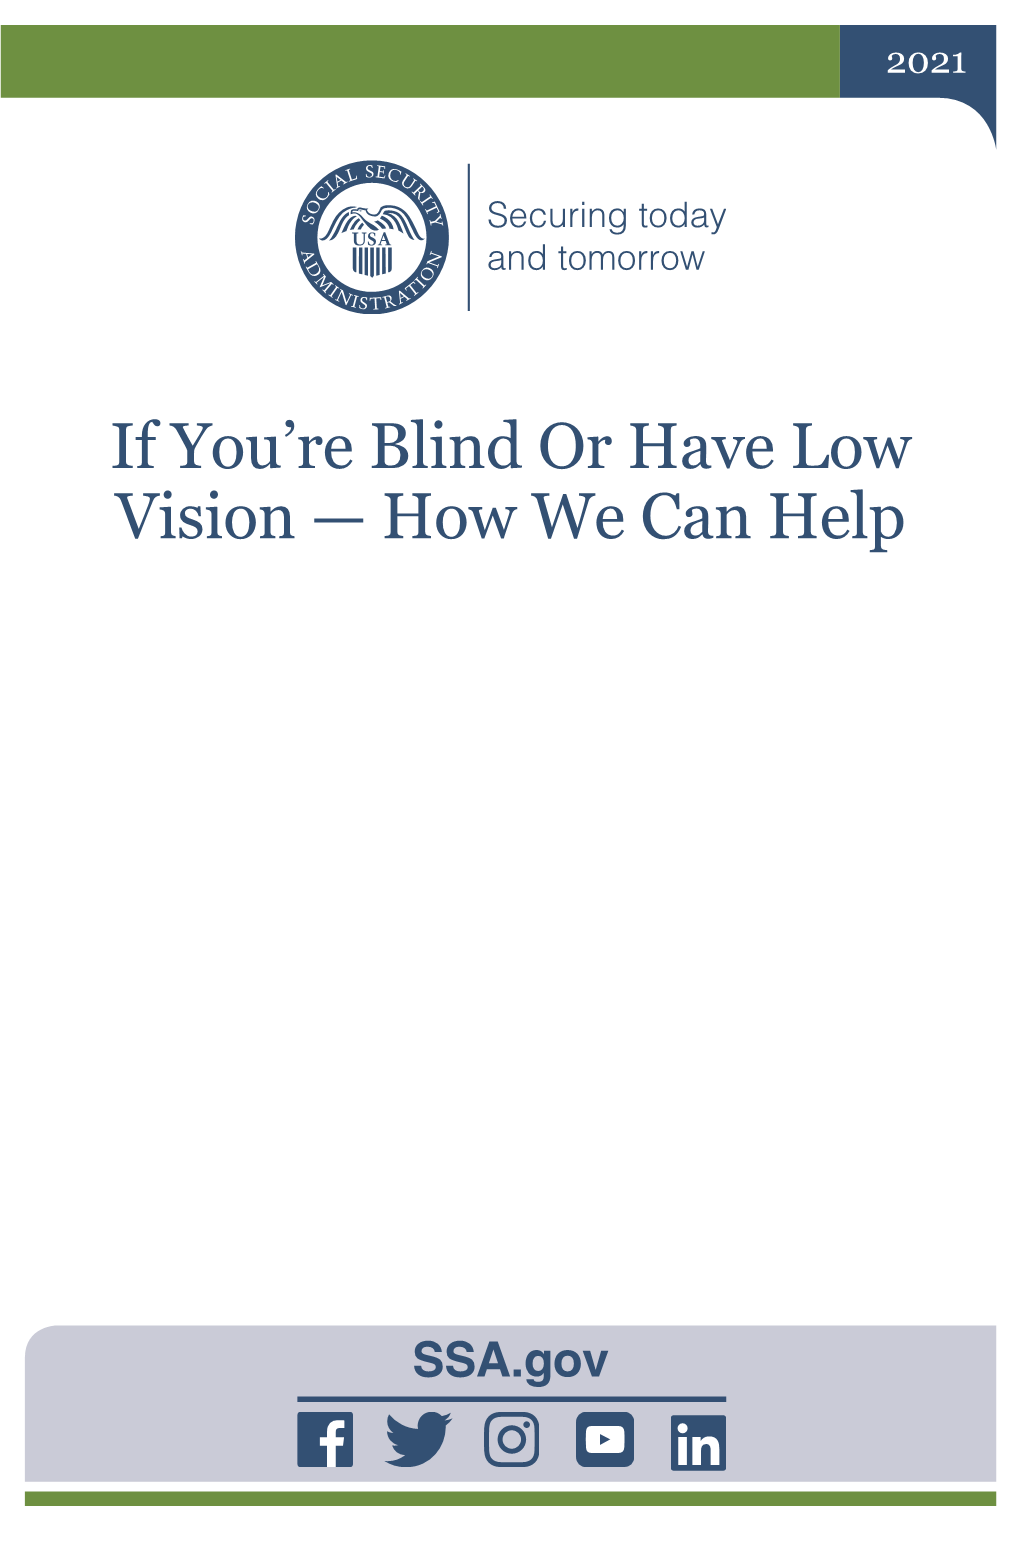 If You're Blind Or Have Low Vision — How We Can Help